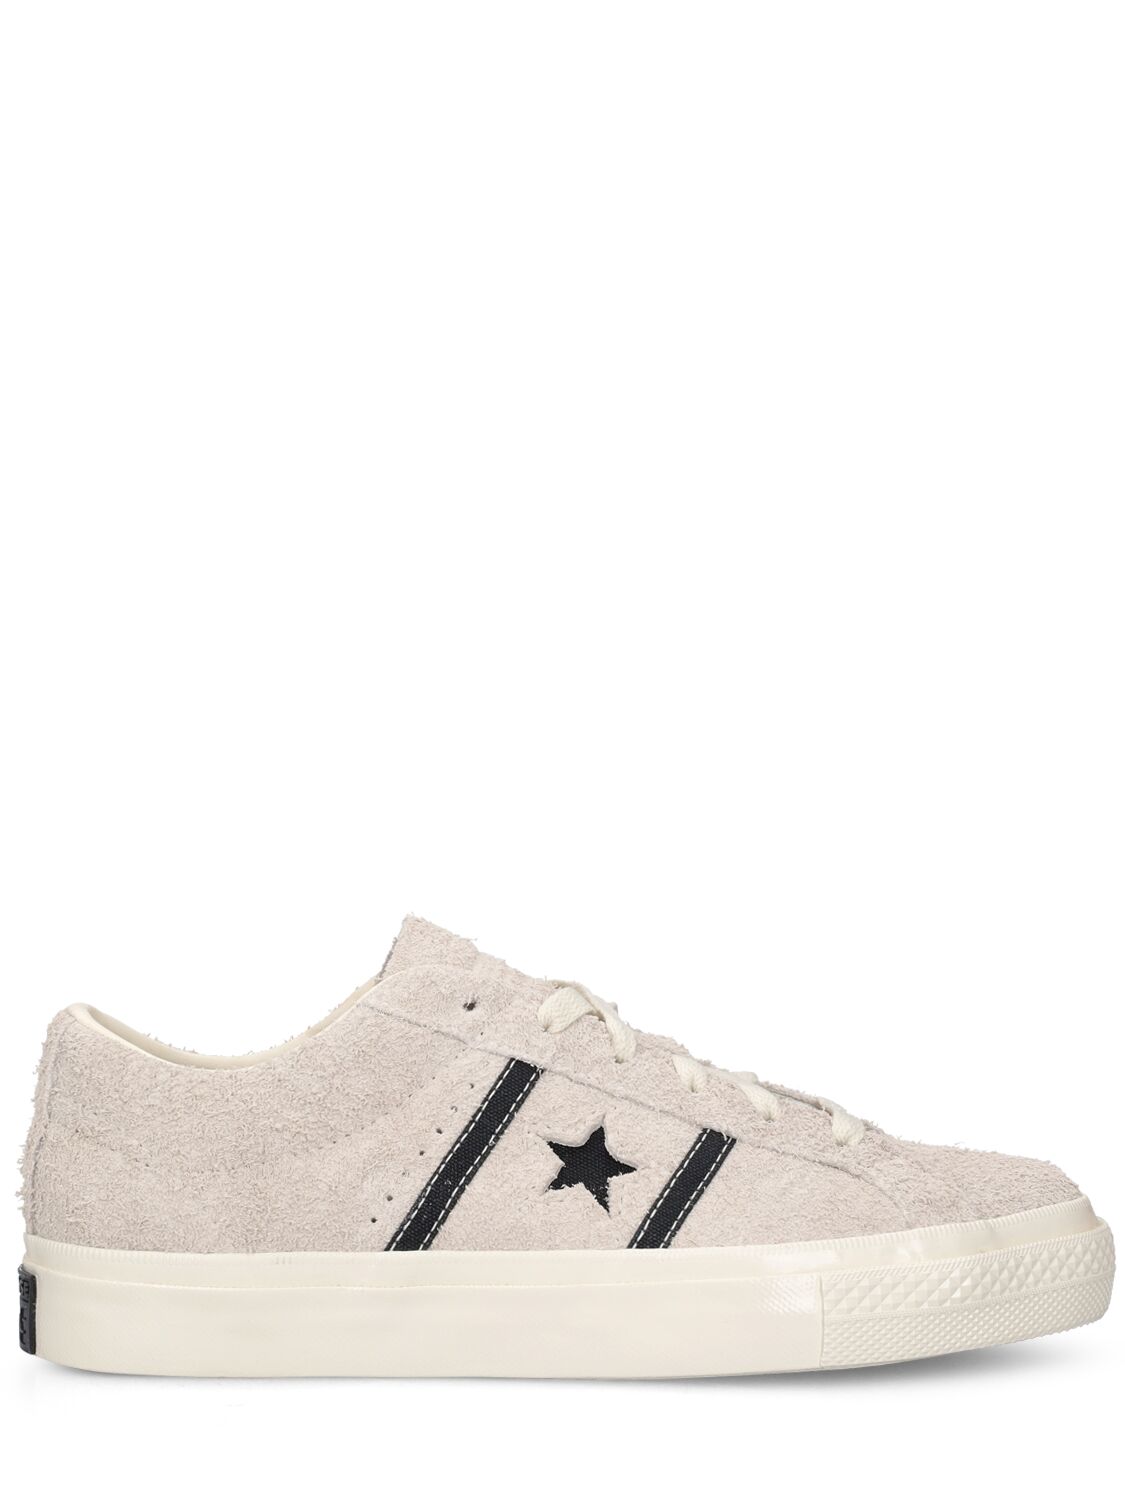 CONVERSE ONE STAR ACADEMY PRO SNEAKERS